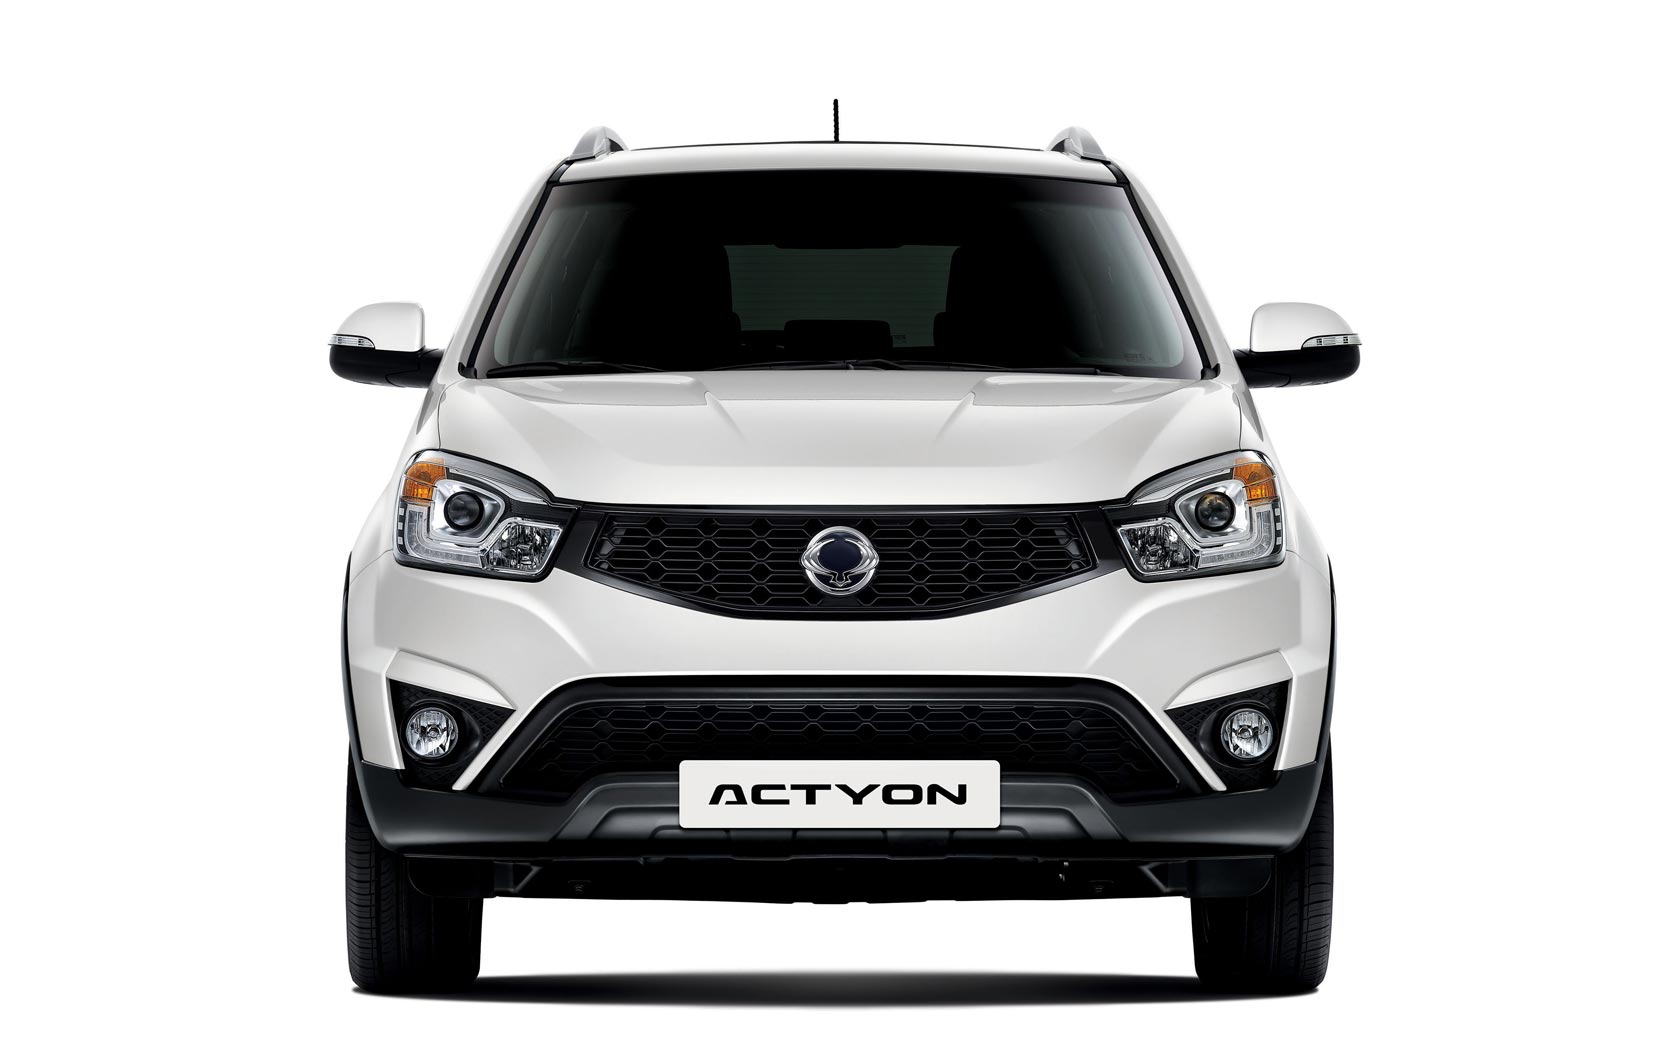 New actyon 2014. SSANGYONG Actyon II. SSANGYONG SSANGYONG Actyon. SSANGYONG Actyon 2013. ССАНГЙОНГ Актион 2014.